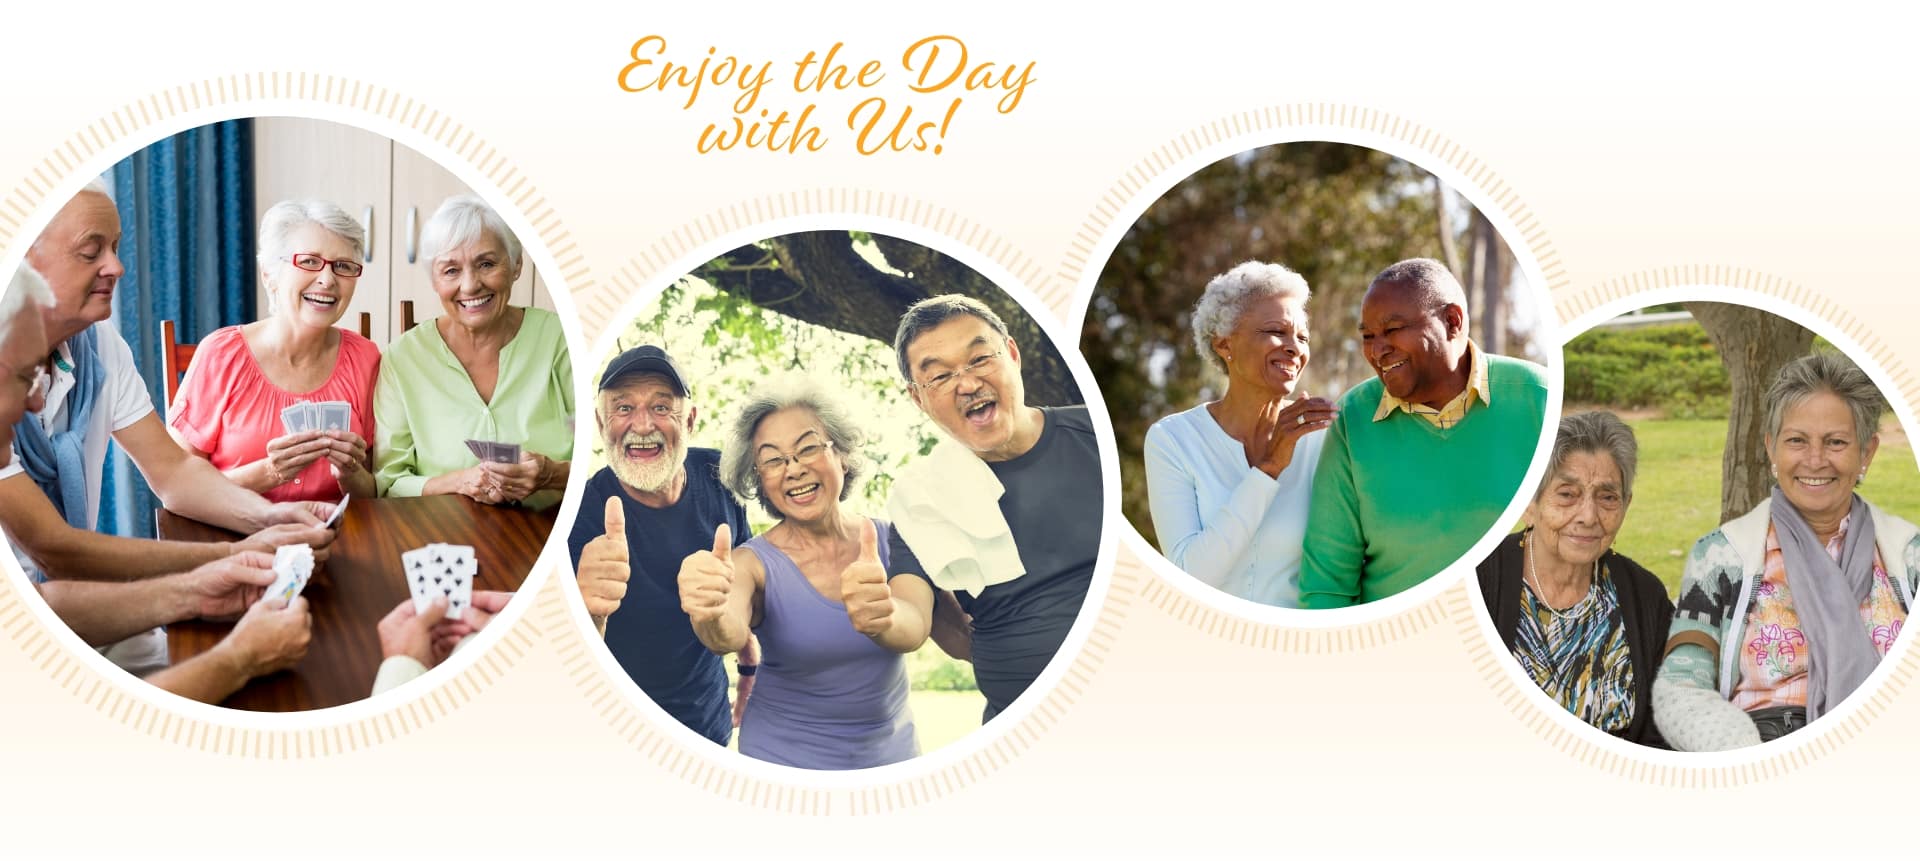 Top Adult Day Health Care in Baltimore, MD by Renaissance Adult Medical Center